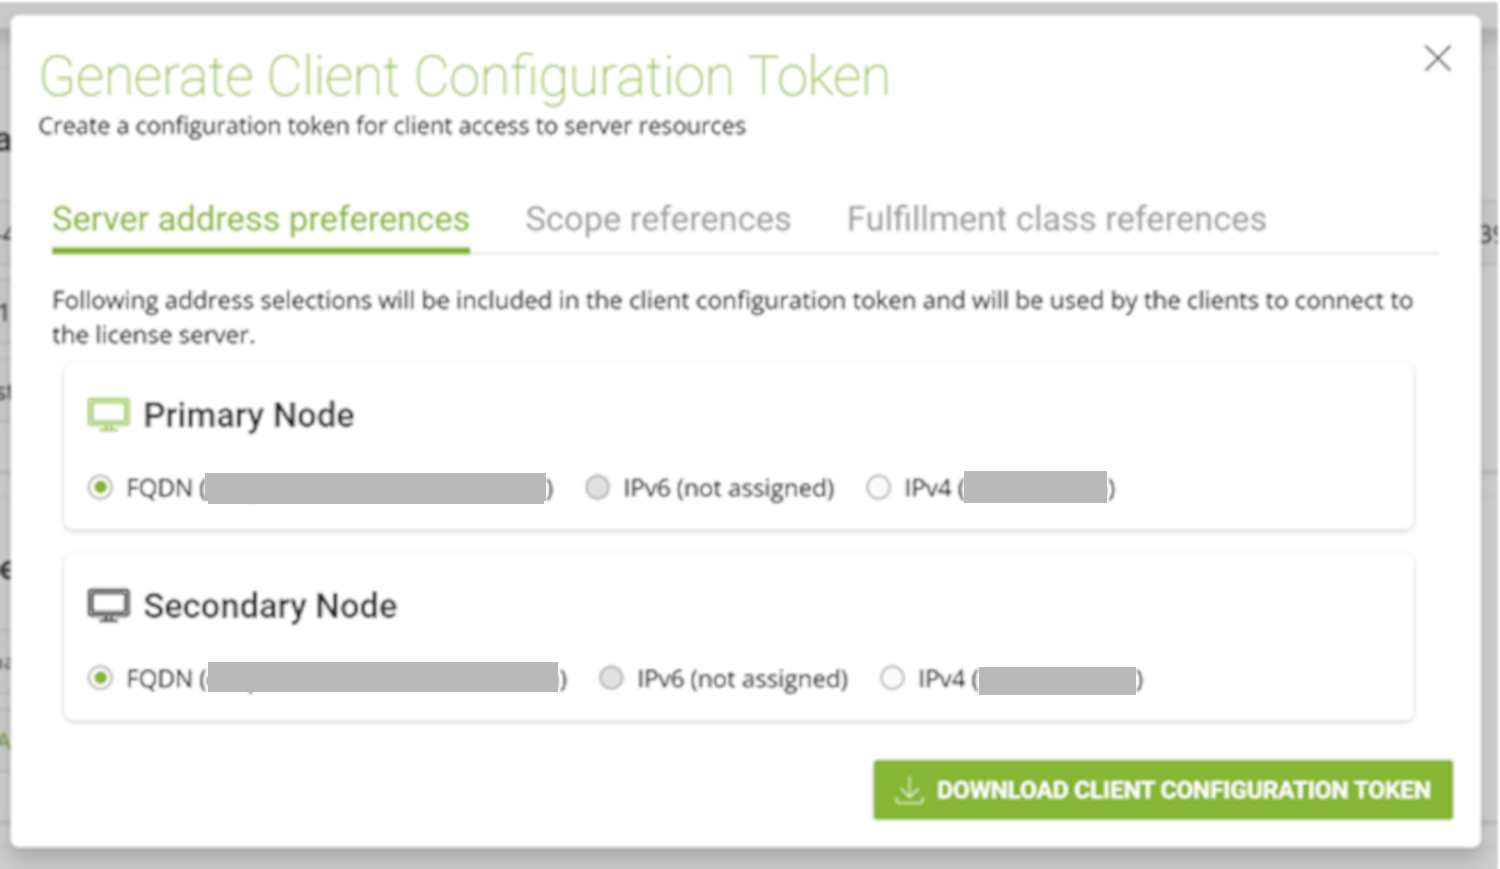 Screen capture showing the Server address preferences tab in the Generate Client Configuration Token pop-up window